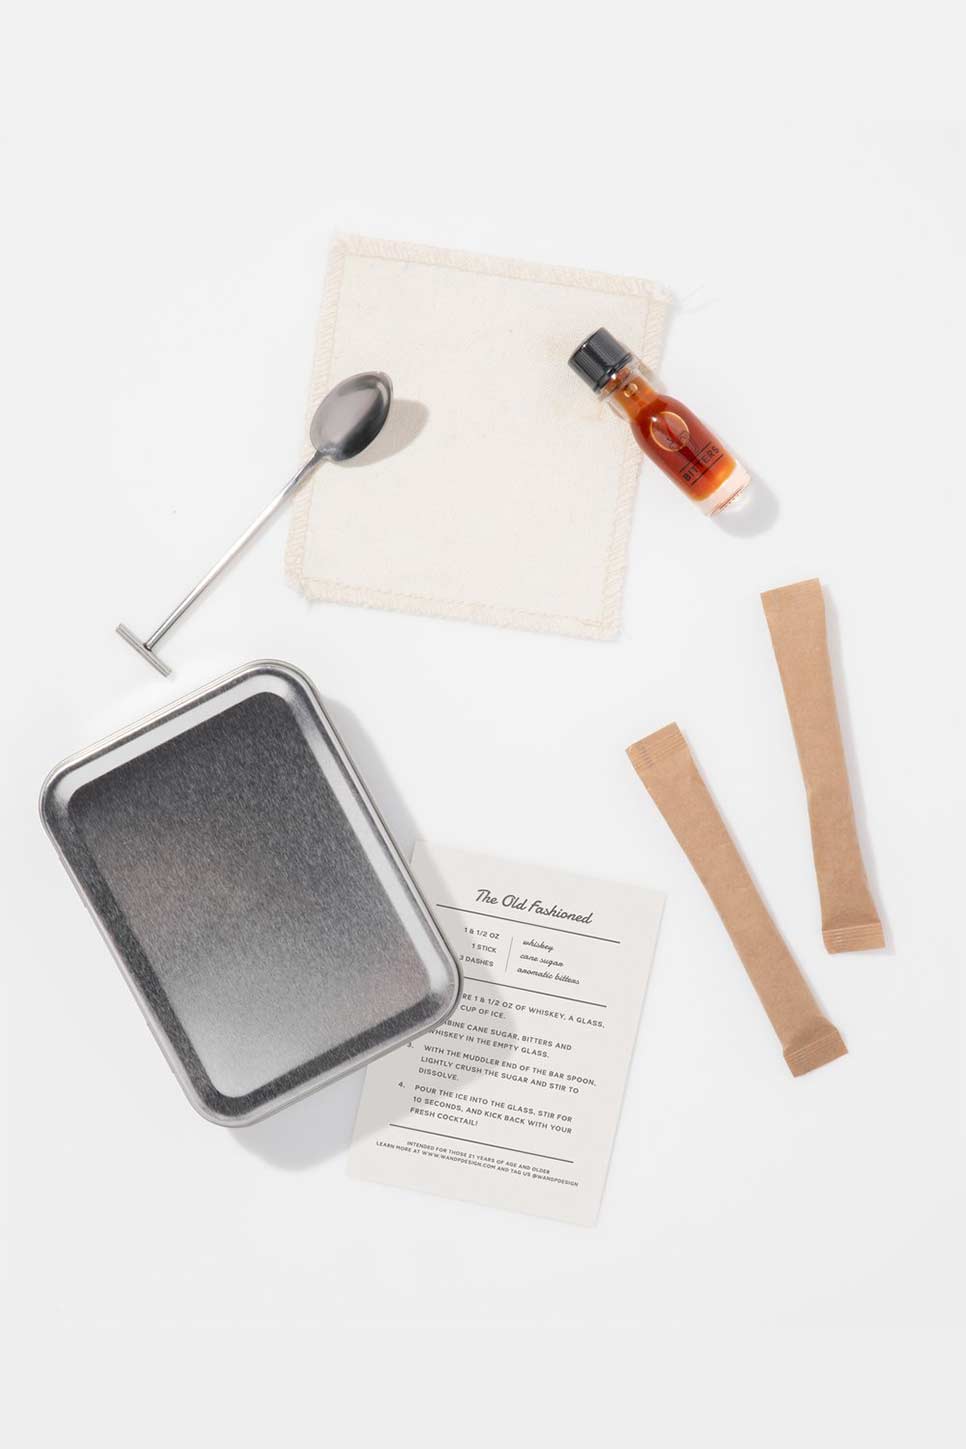 CRAFT COCKTAIL KIT: OLD FASHIONED